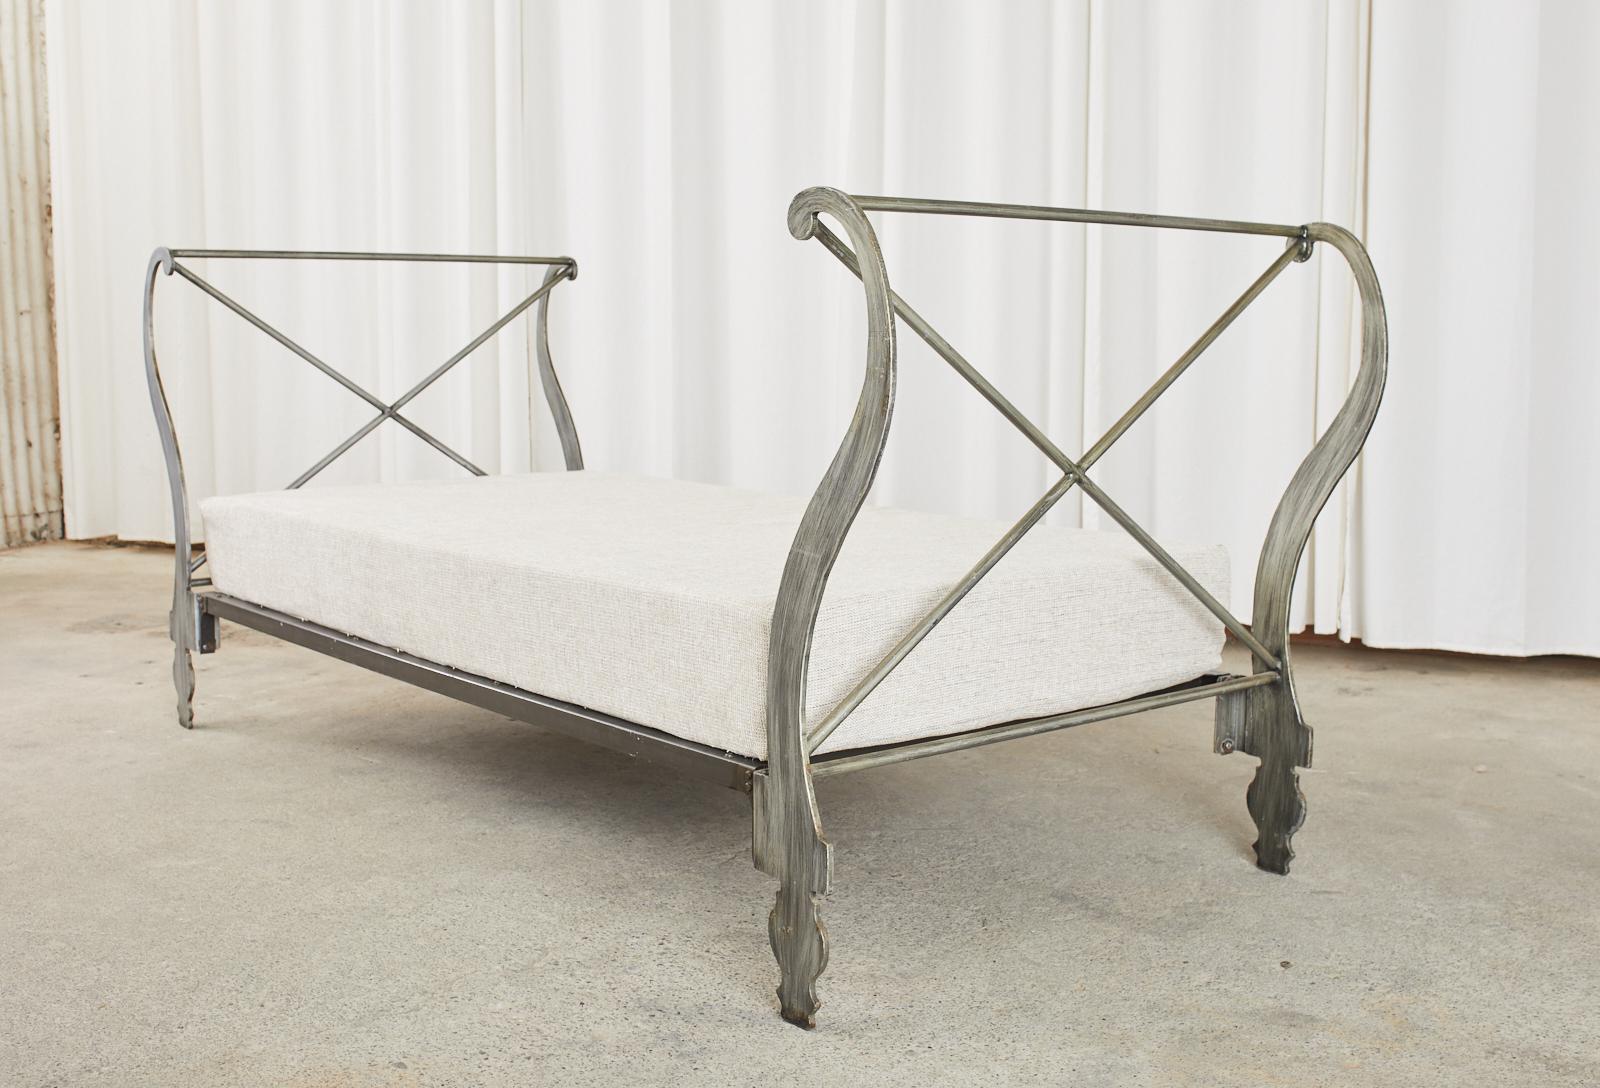 Stylish Italian iron daybed featuring large, dramatic scrolled ends with x-form stretchers. The daybed has a fitted cushion measuring 8 inches deep upholstered with newer fabric. Supported by shaped legs and feet. The iron has an intentionally